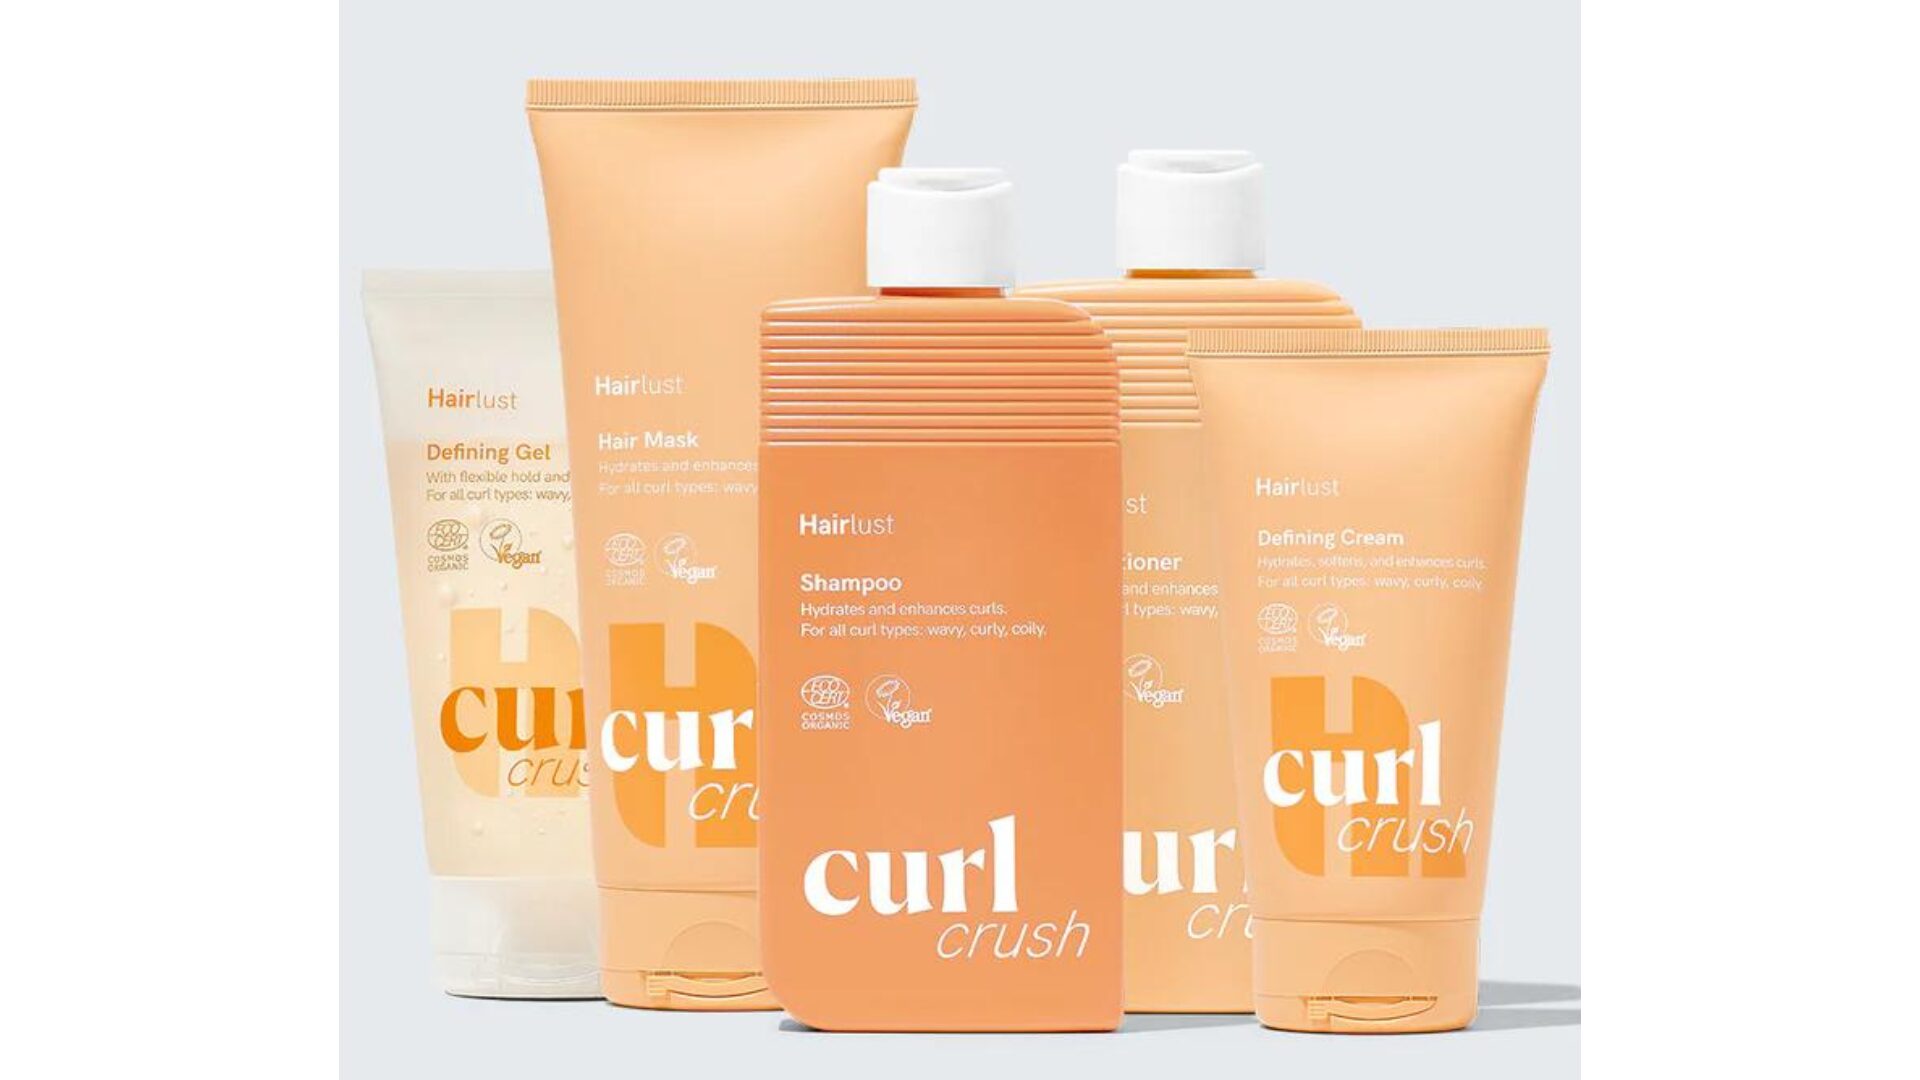 Curly hair should adopt the Hairlust Curl Crush Bundle routine // Source: Hairlust